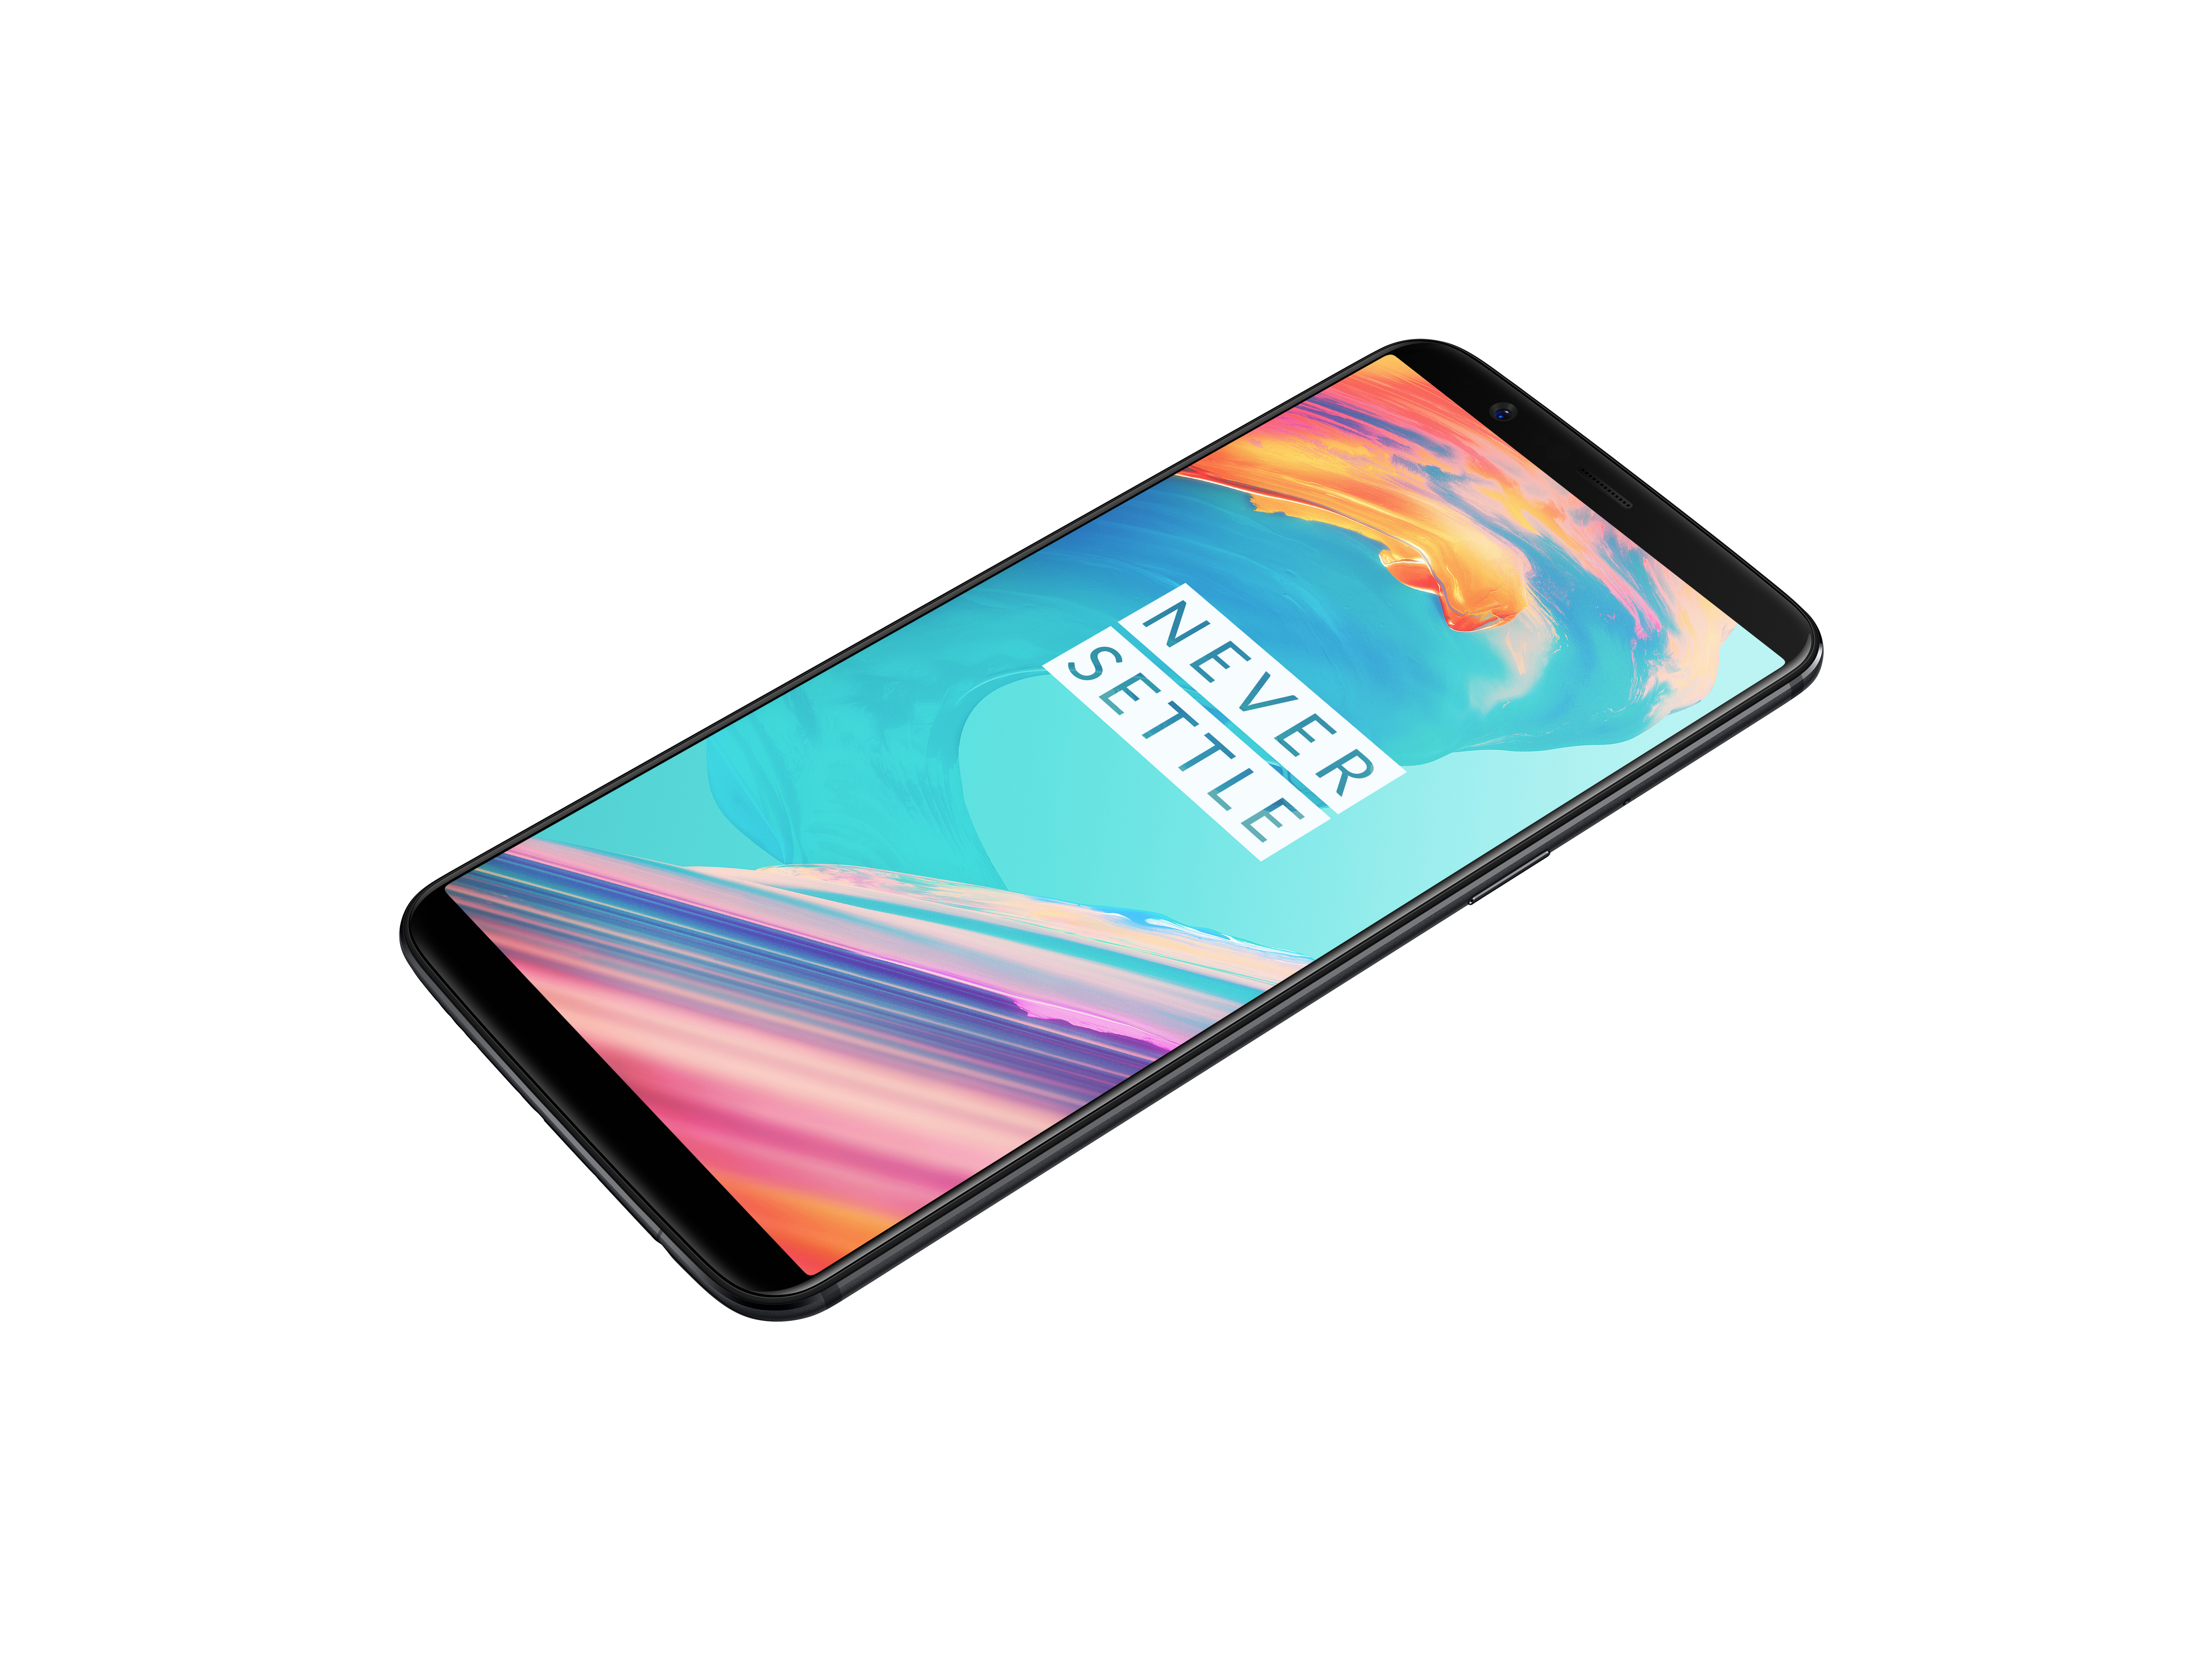 One Plus 5 Logo Wallpapers